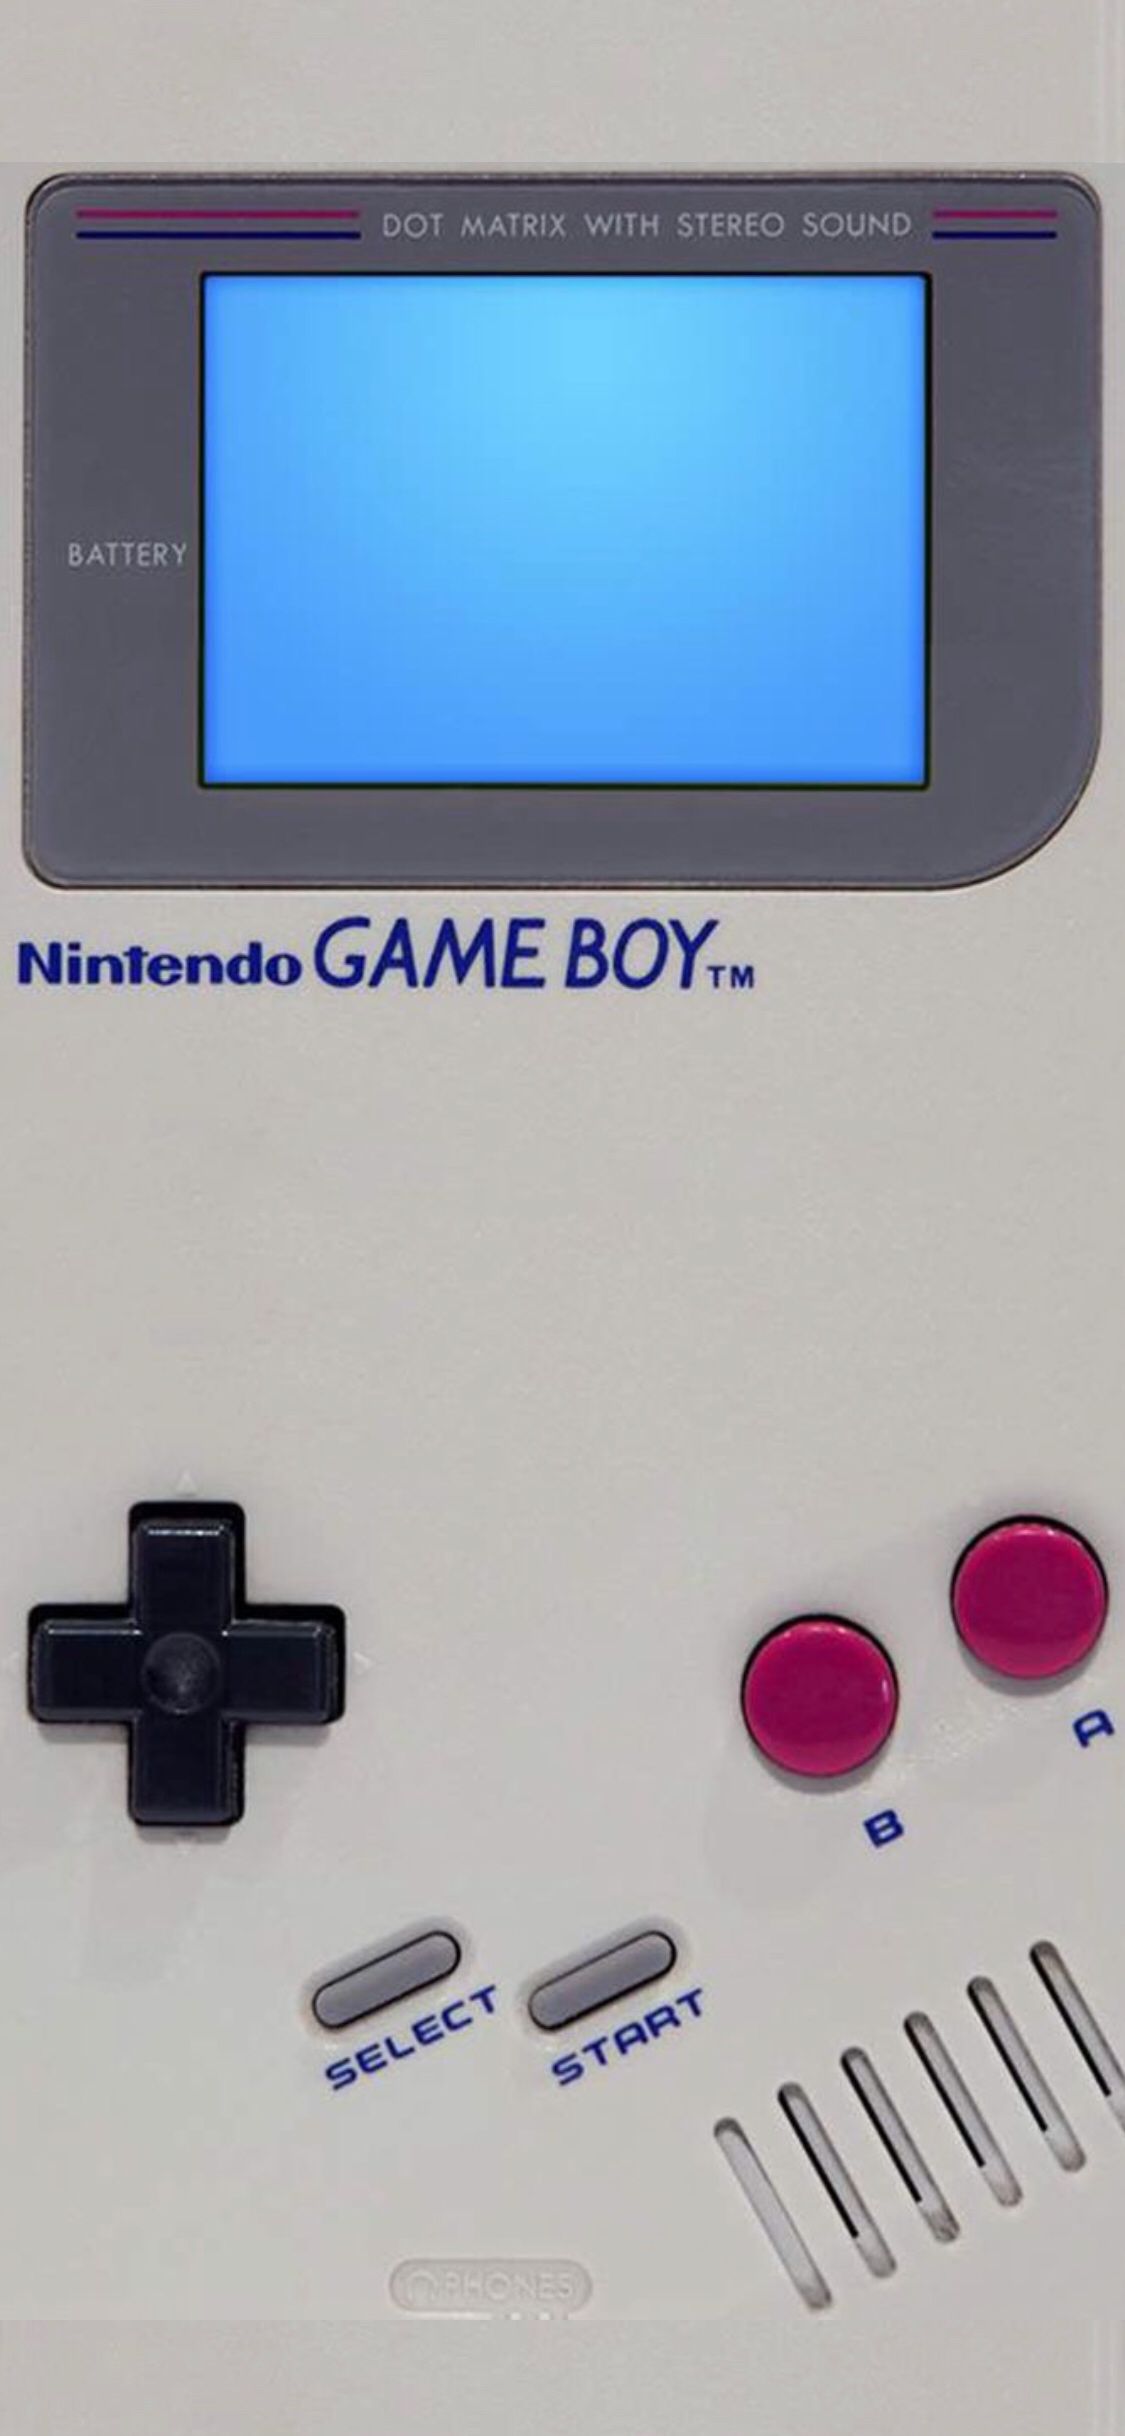 A Game Boy from the 90s with a blue screen - Game Boy